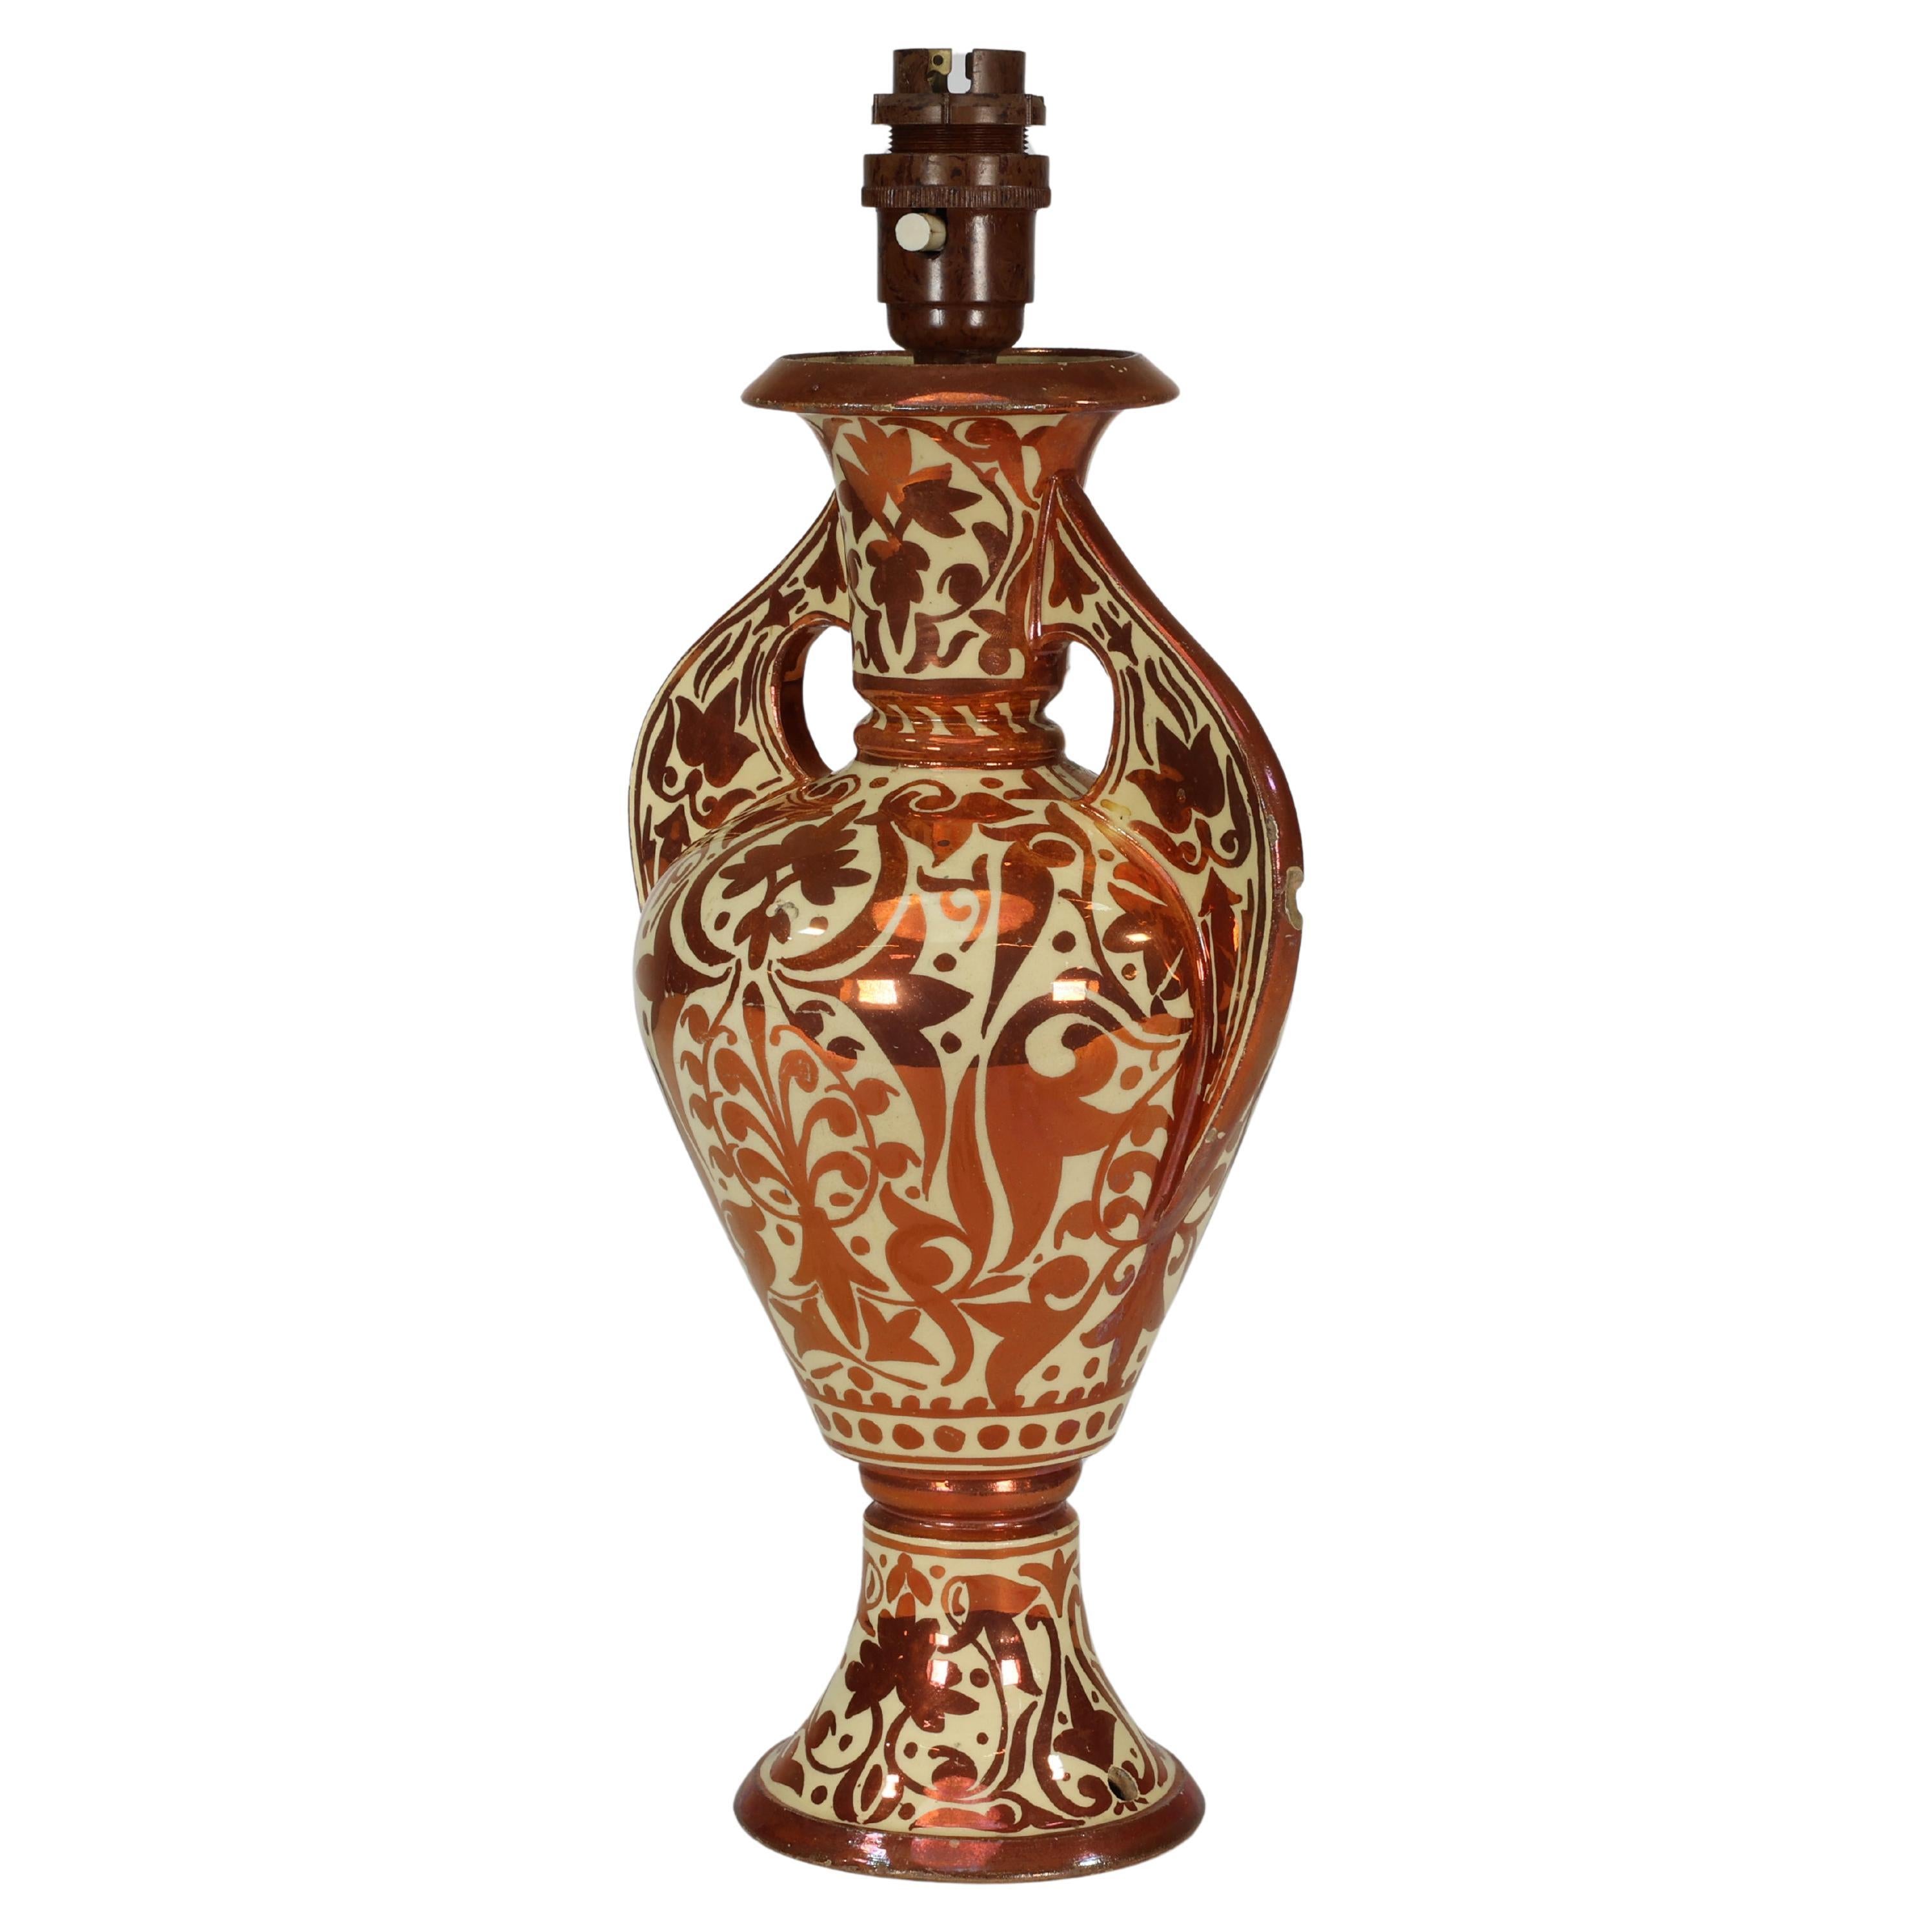 Cantagalli Italian porcelain copper lustre vase converted into a table lamp. For Sale